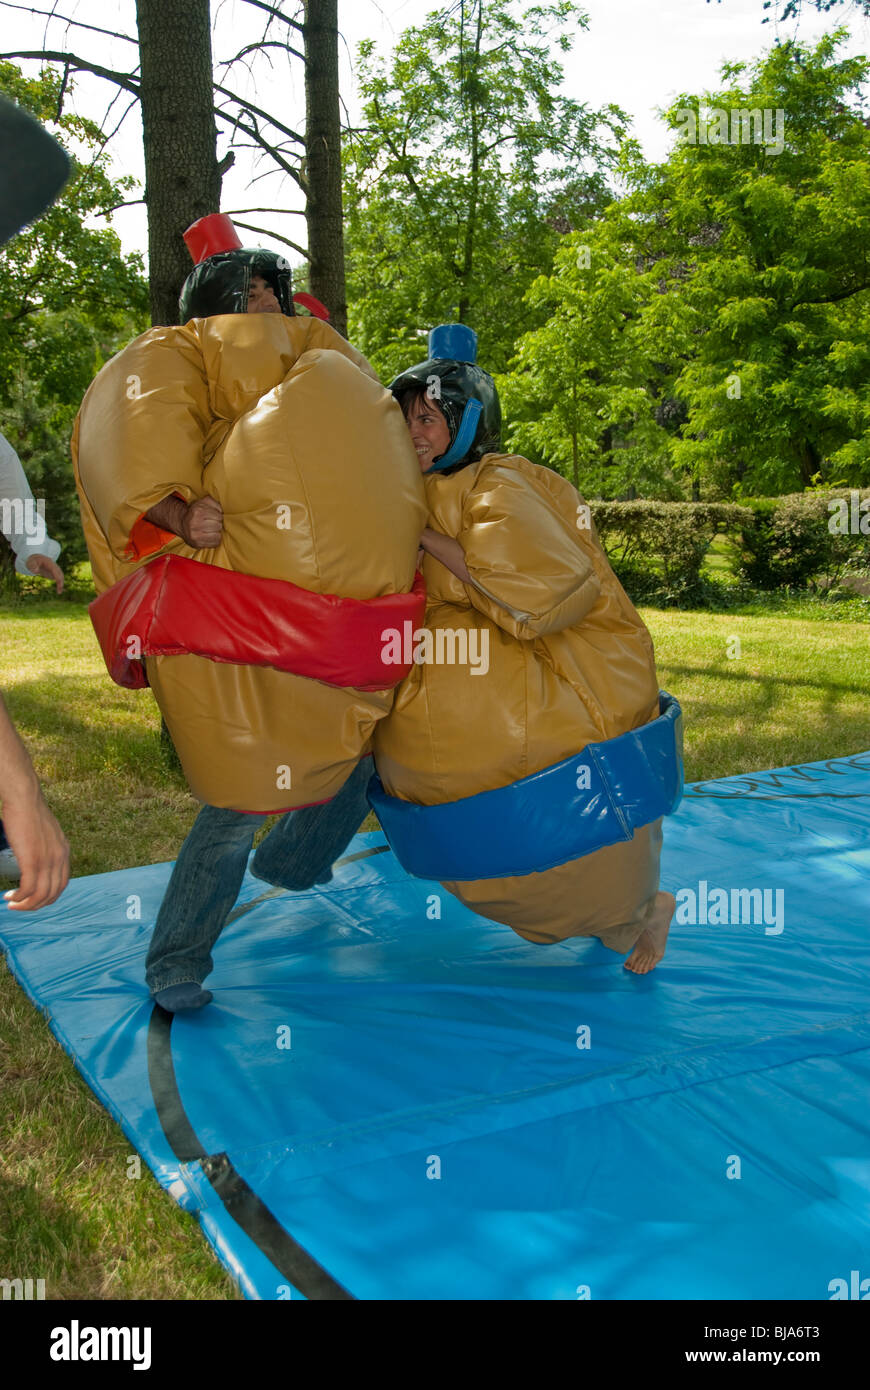 Paris, France, Public Parks, Young People Wrestling Two Sumo Wrestlers in Huge Costumes, Play Fighting Outside in Fat Suits Stock Photo